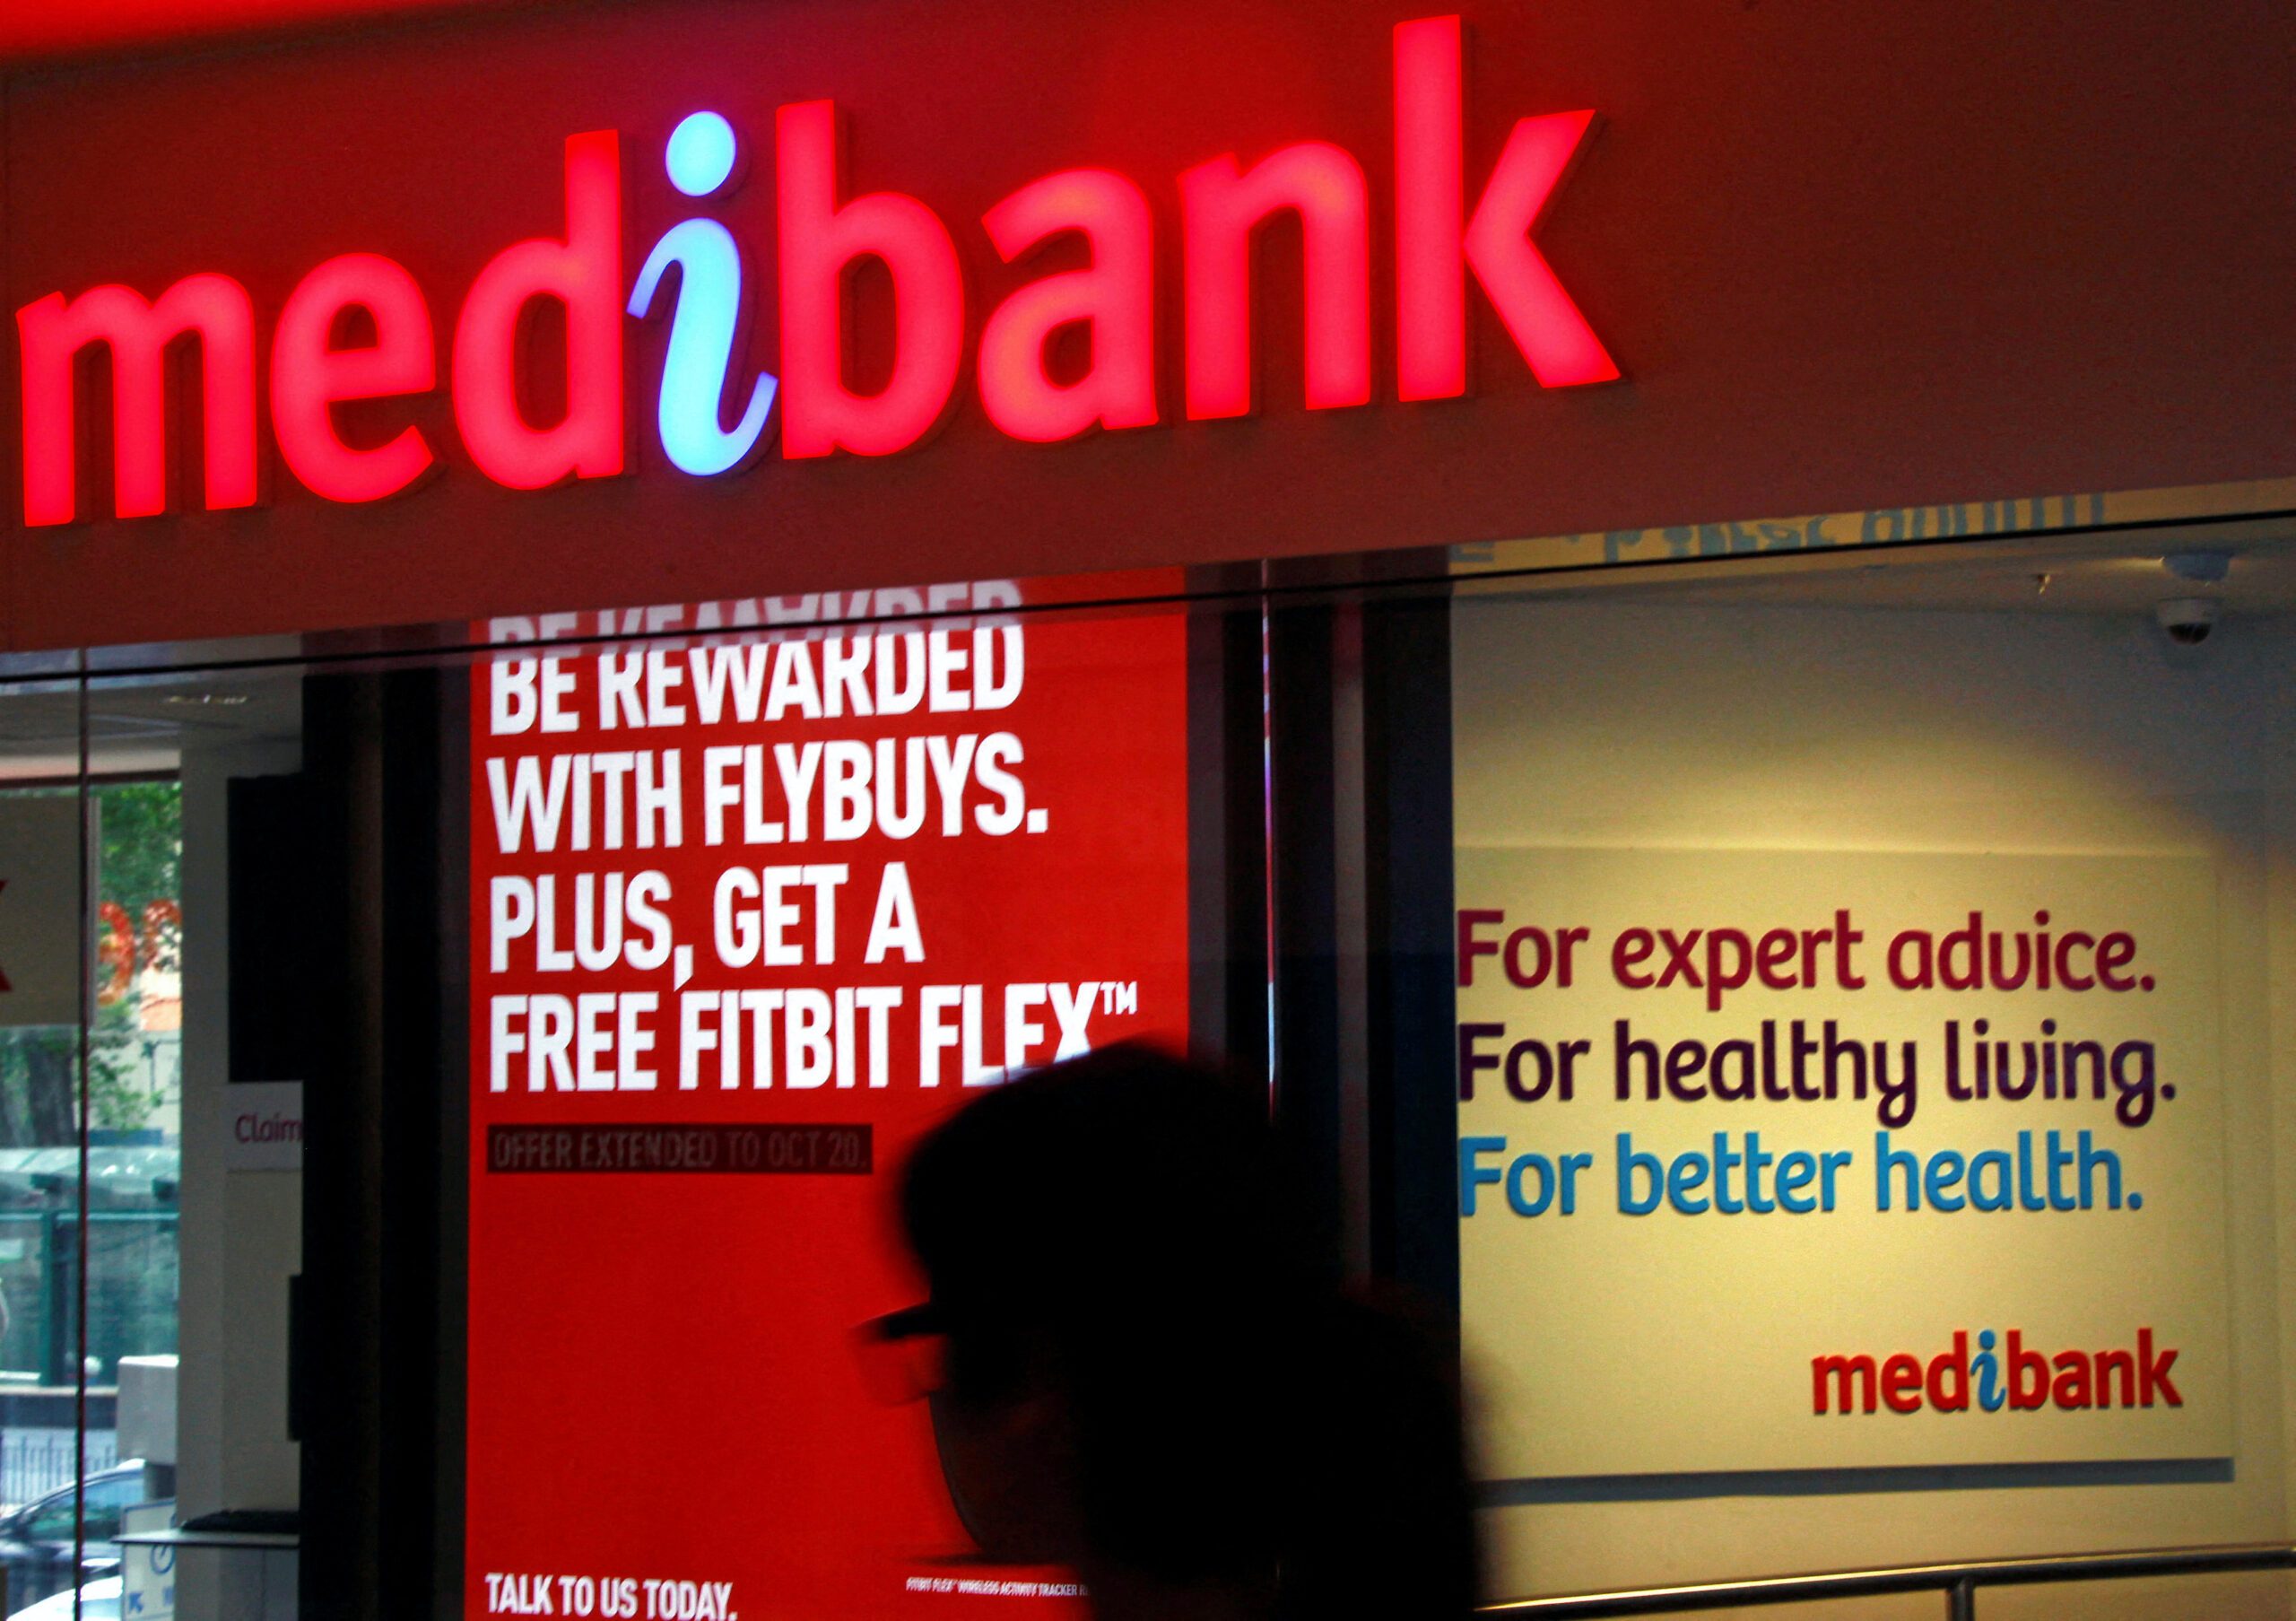 Australia imposes sanctions on Russian hacker over Medibank breach